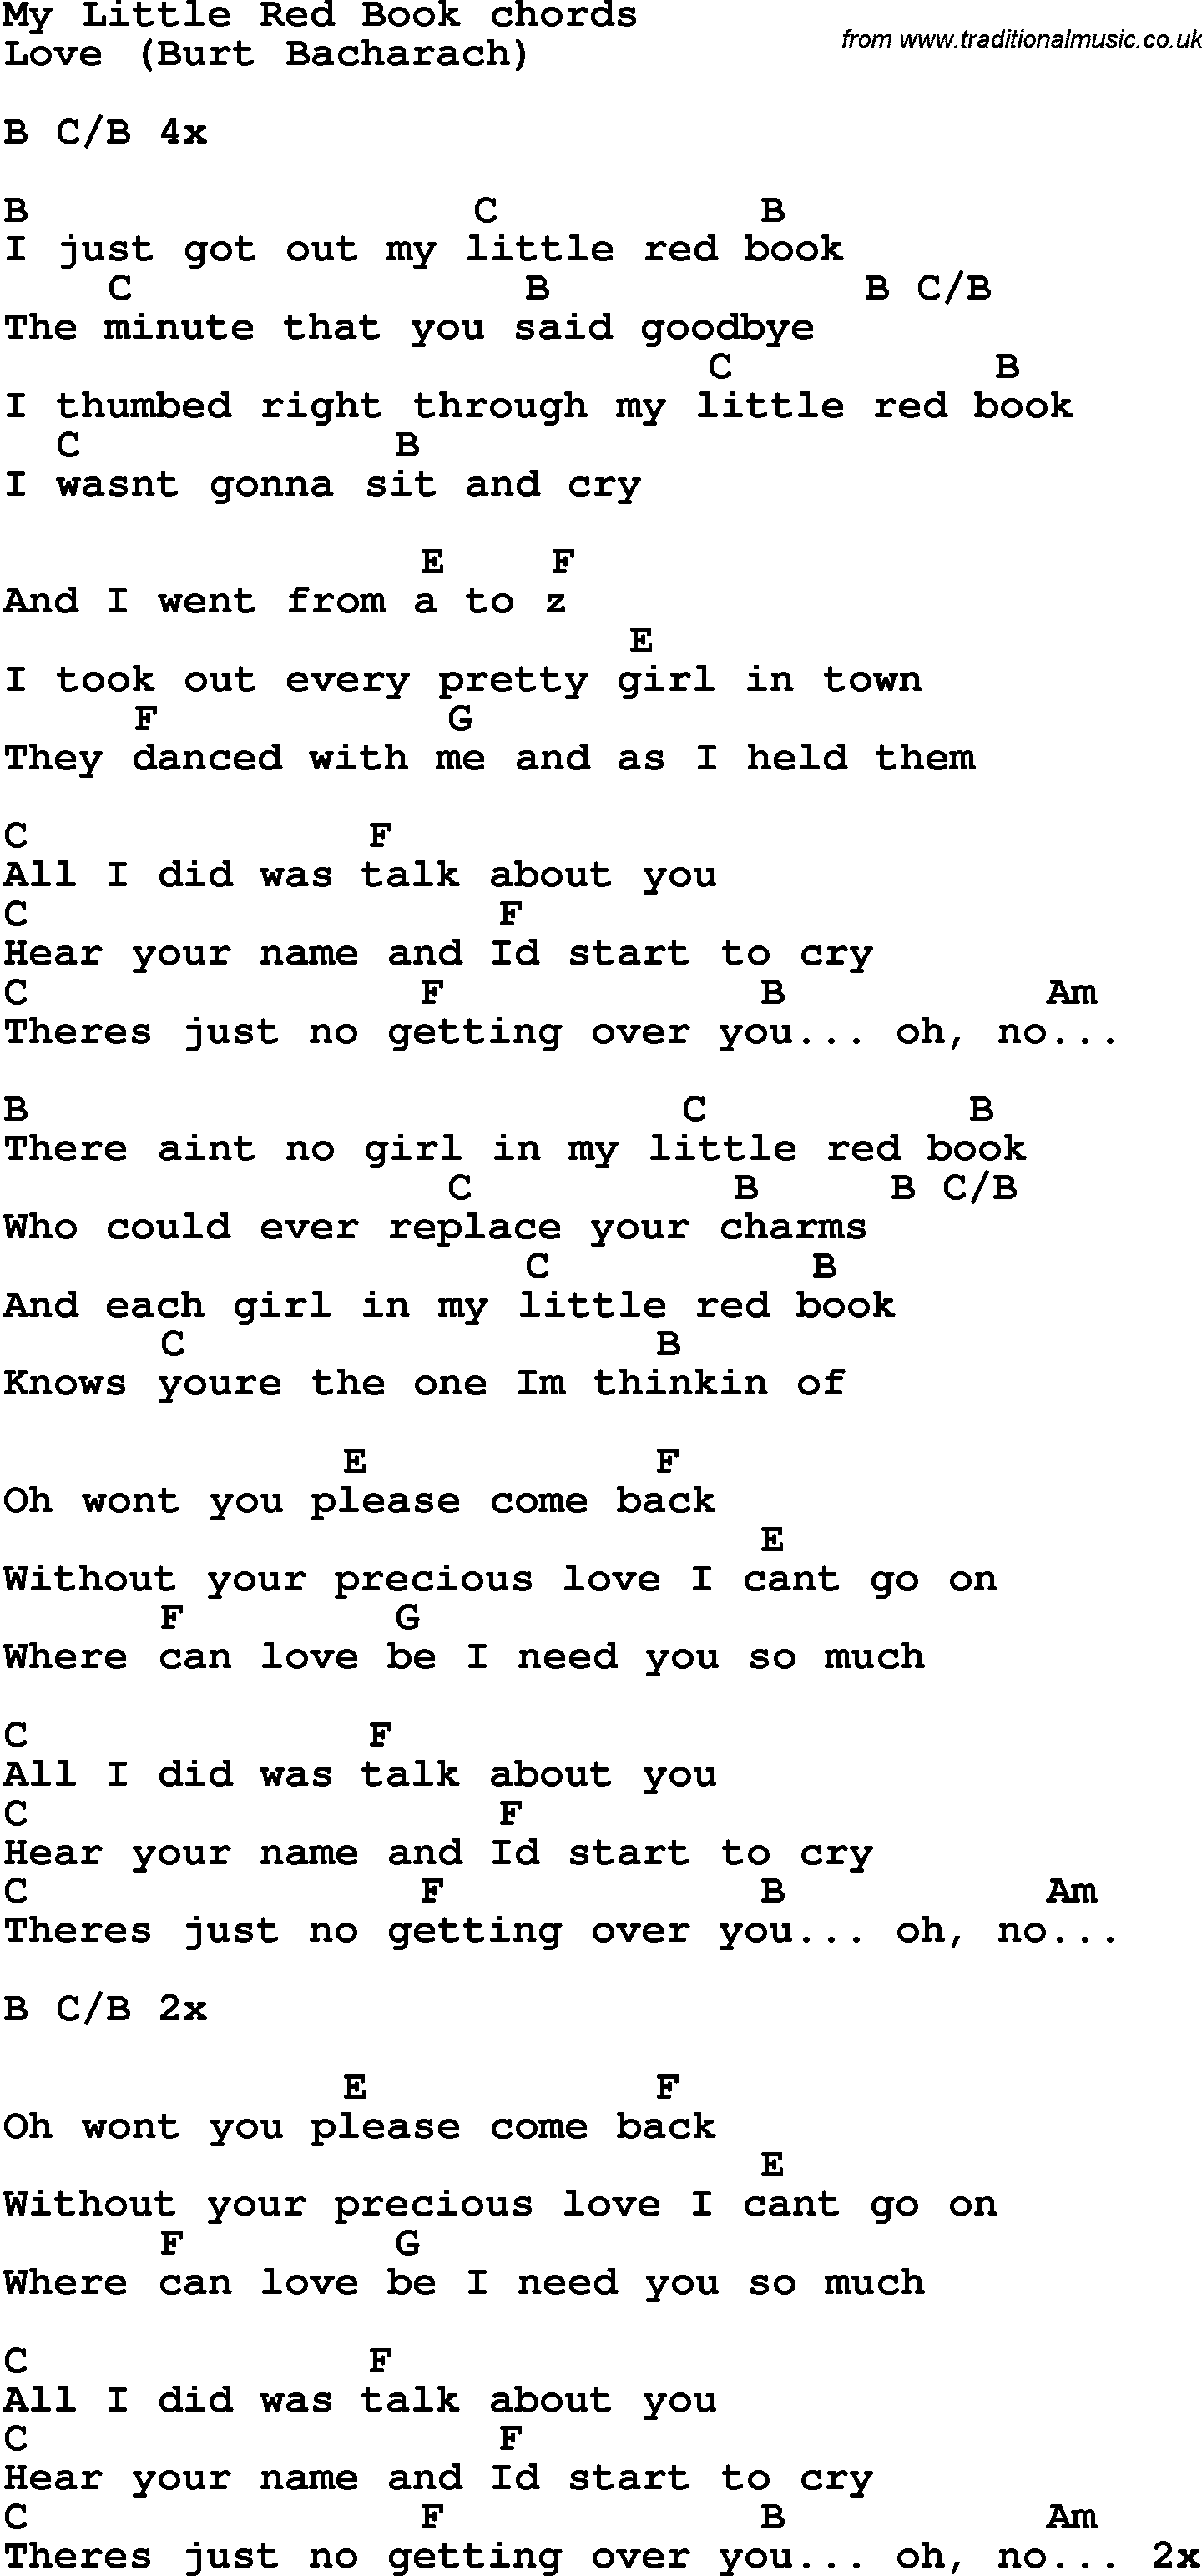 Song Lyrics with guitar chords for My Little Red Book